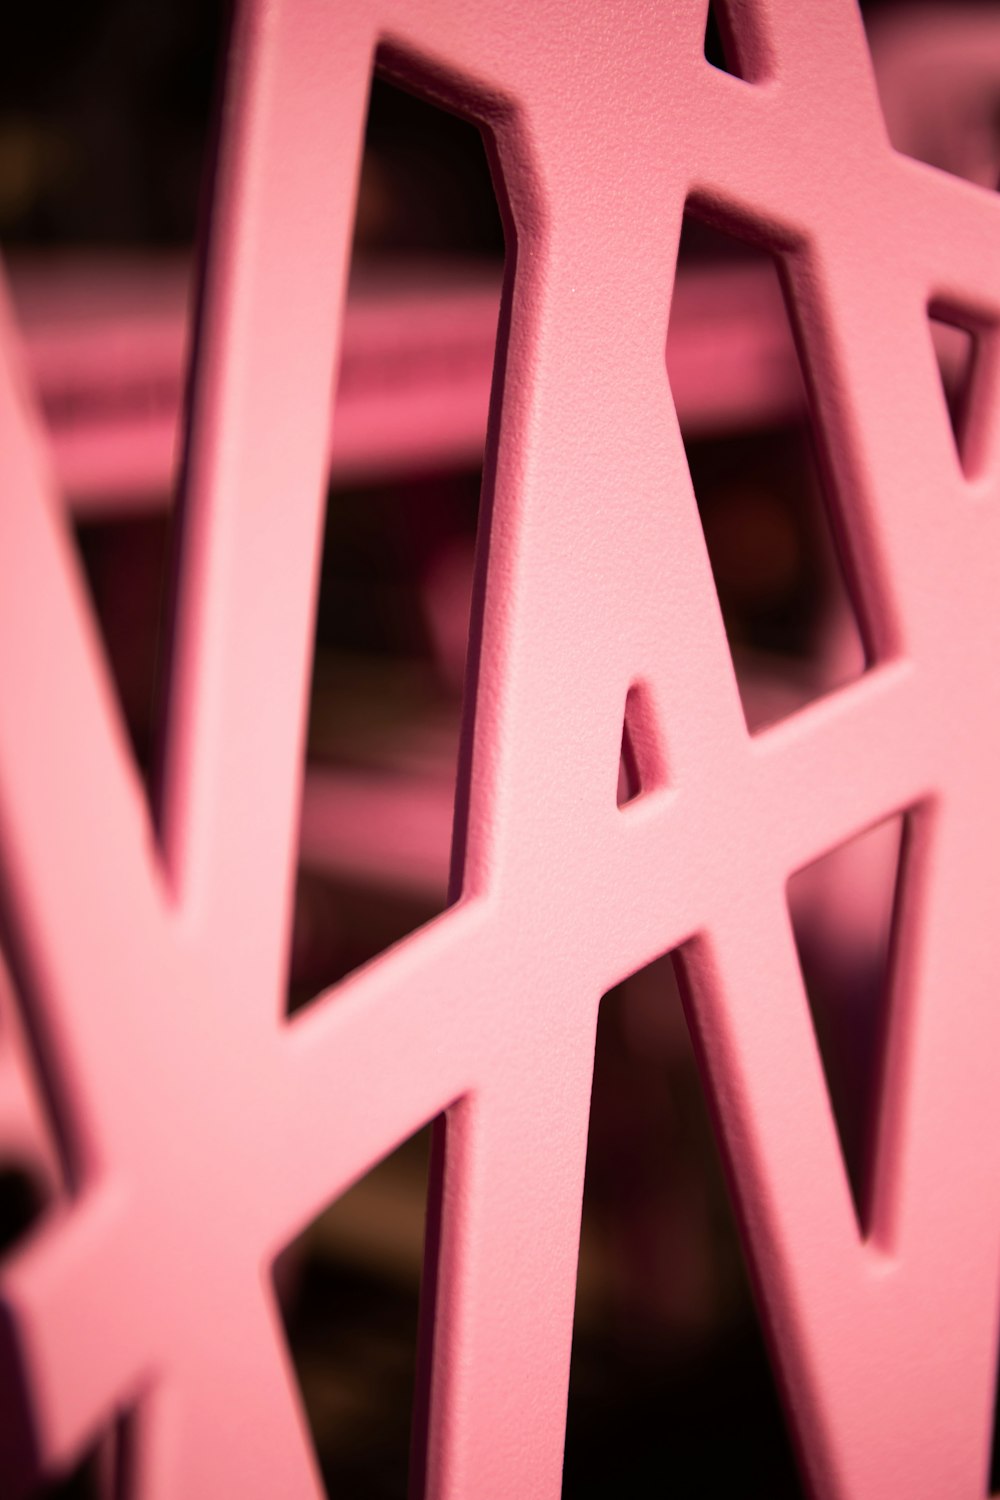 a close up of a pink object